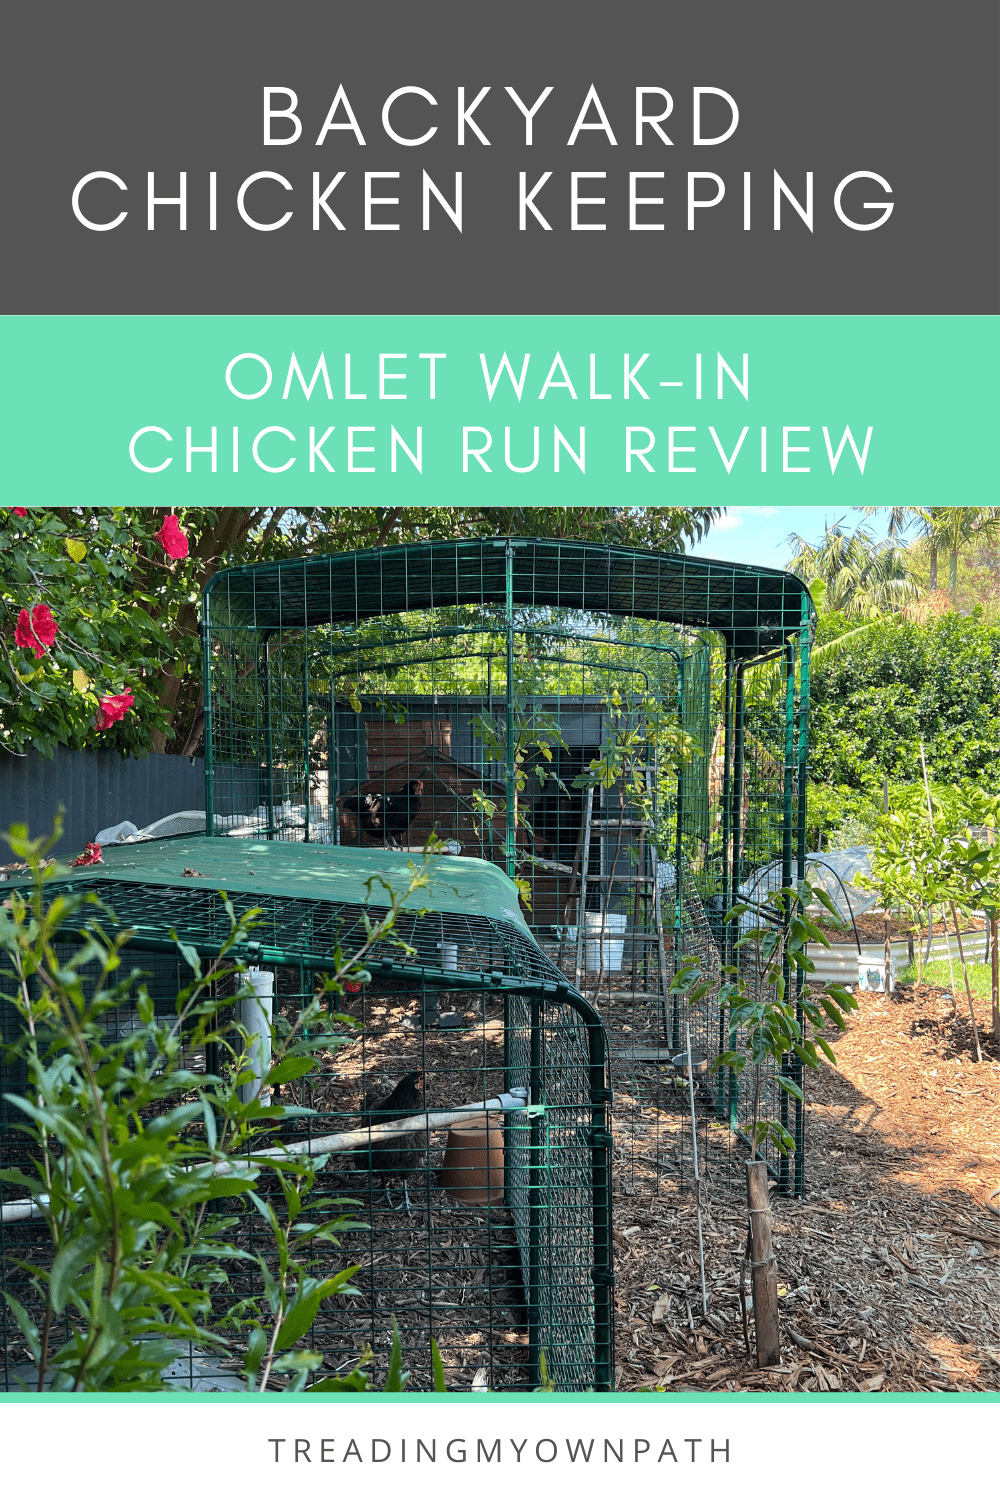 Keeping chickens: Omlet walk-in run and PoleTree review